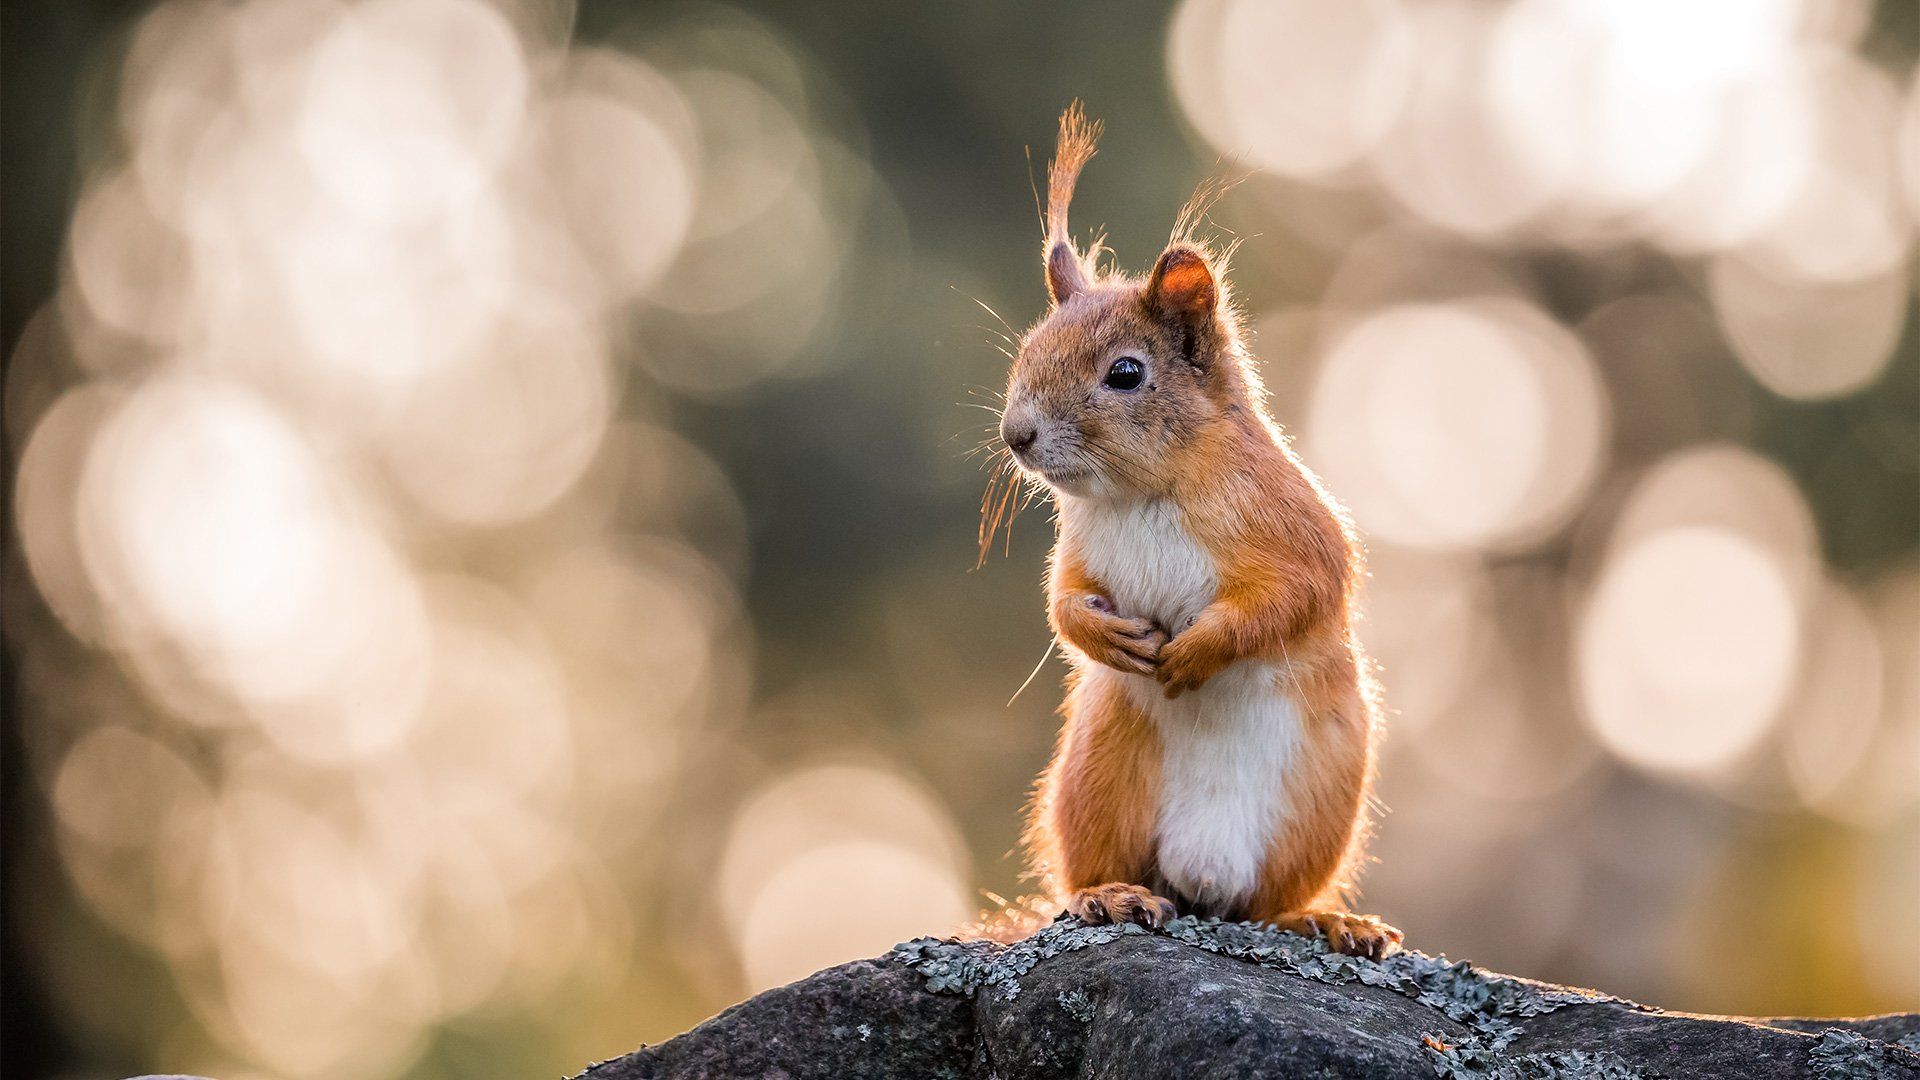 A squirrel stands on a tree branch, the dappled golden sunlight behind it creating a circular bokeh effect background.